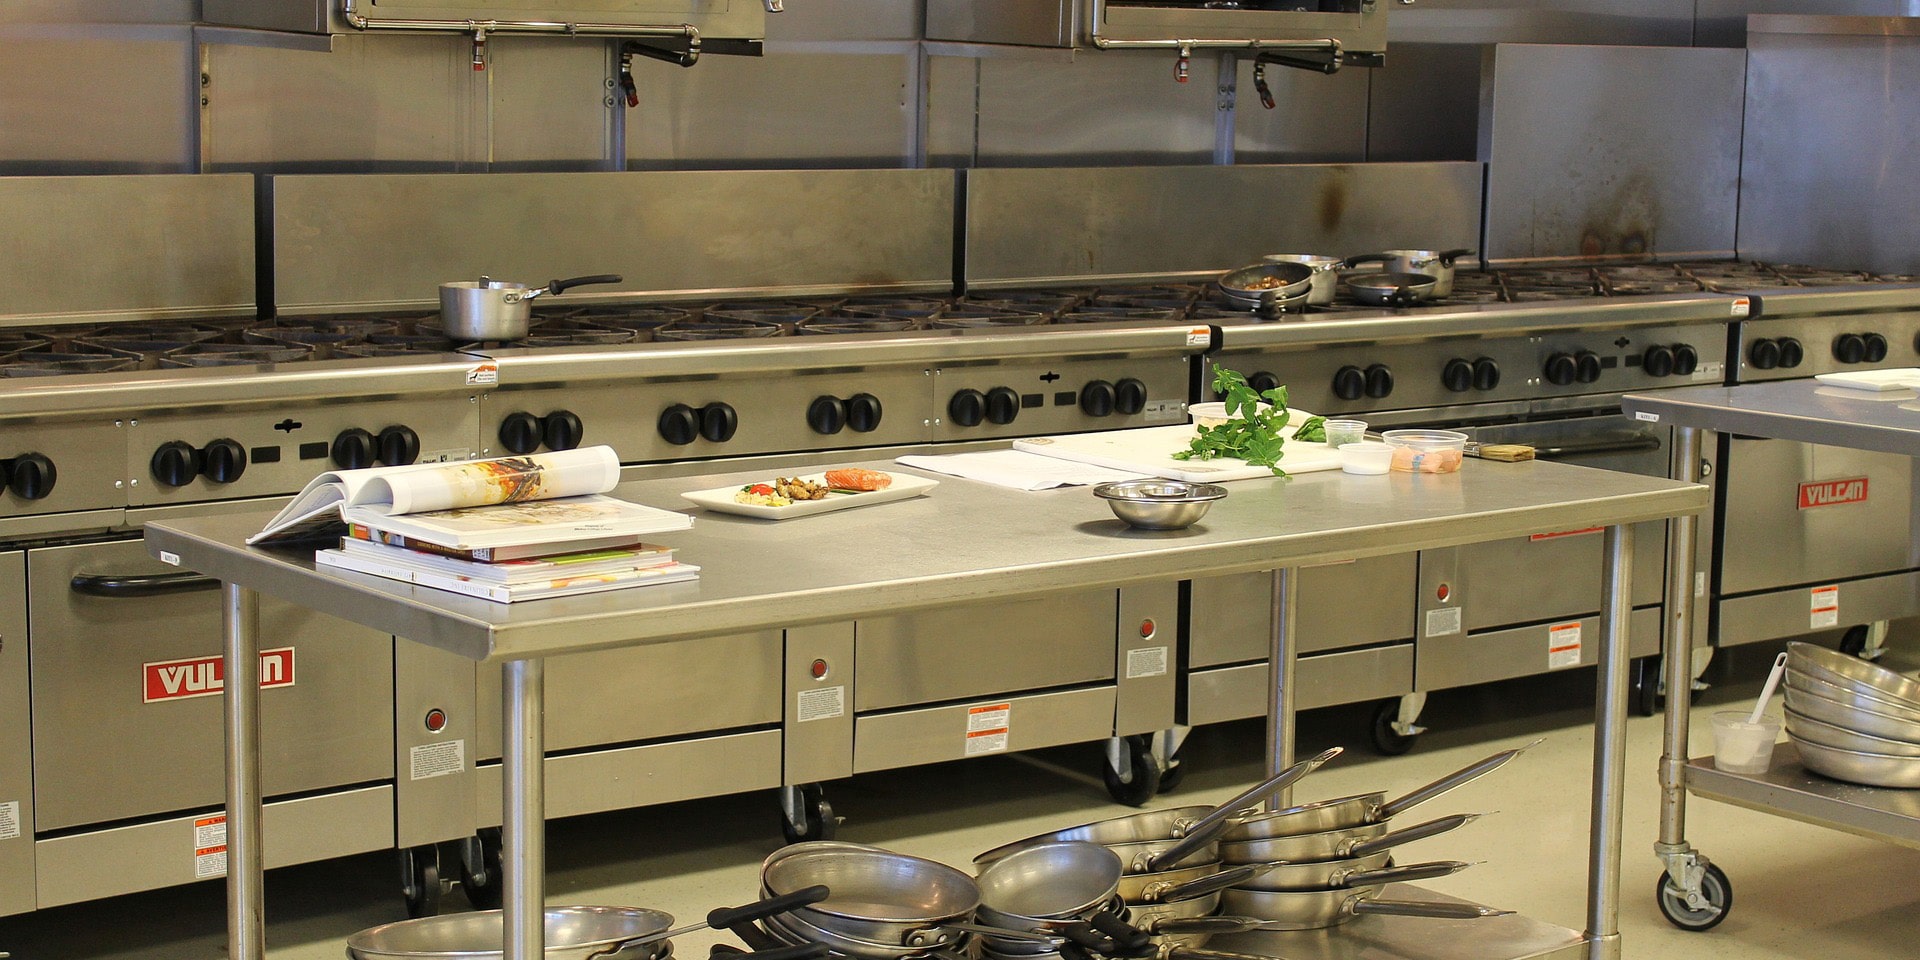 Restaurant and Commercial Kitchen Equipment in Rome, NY